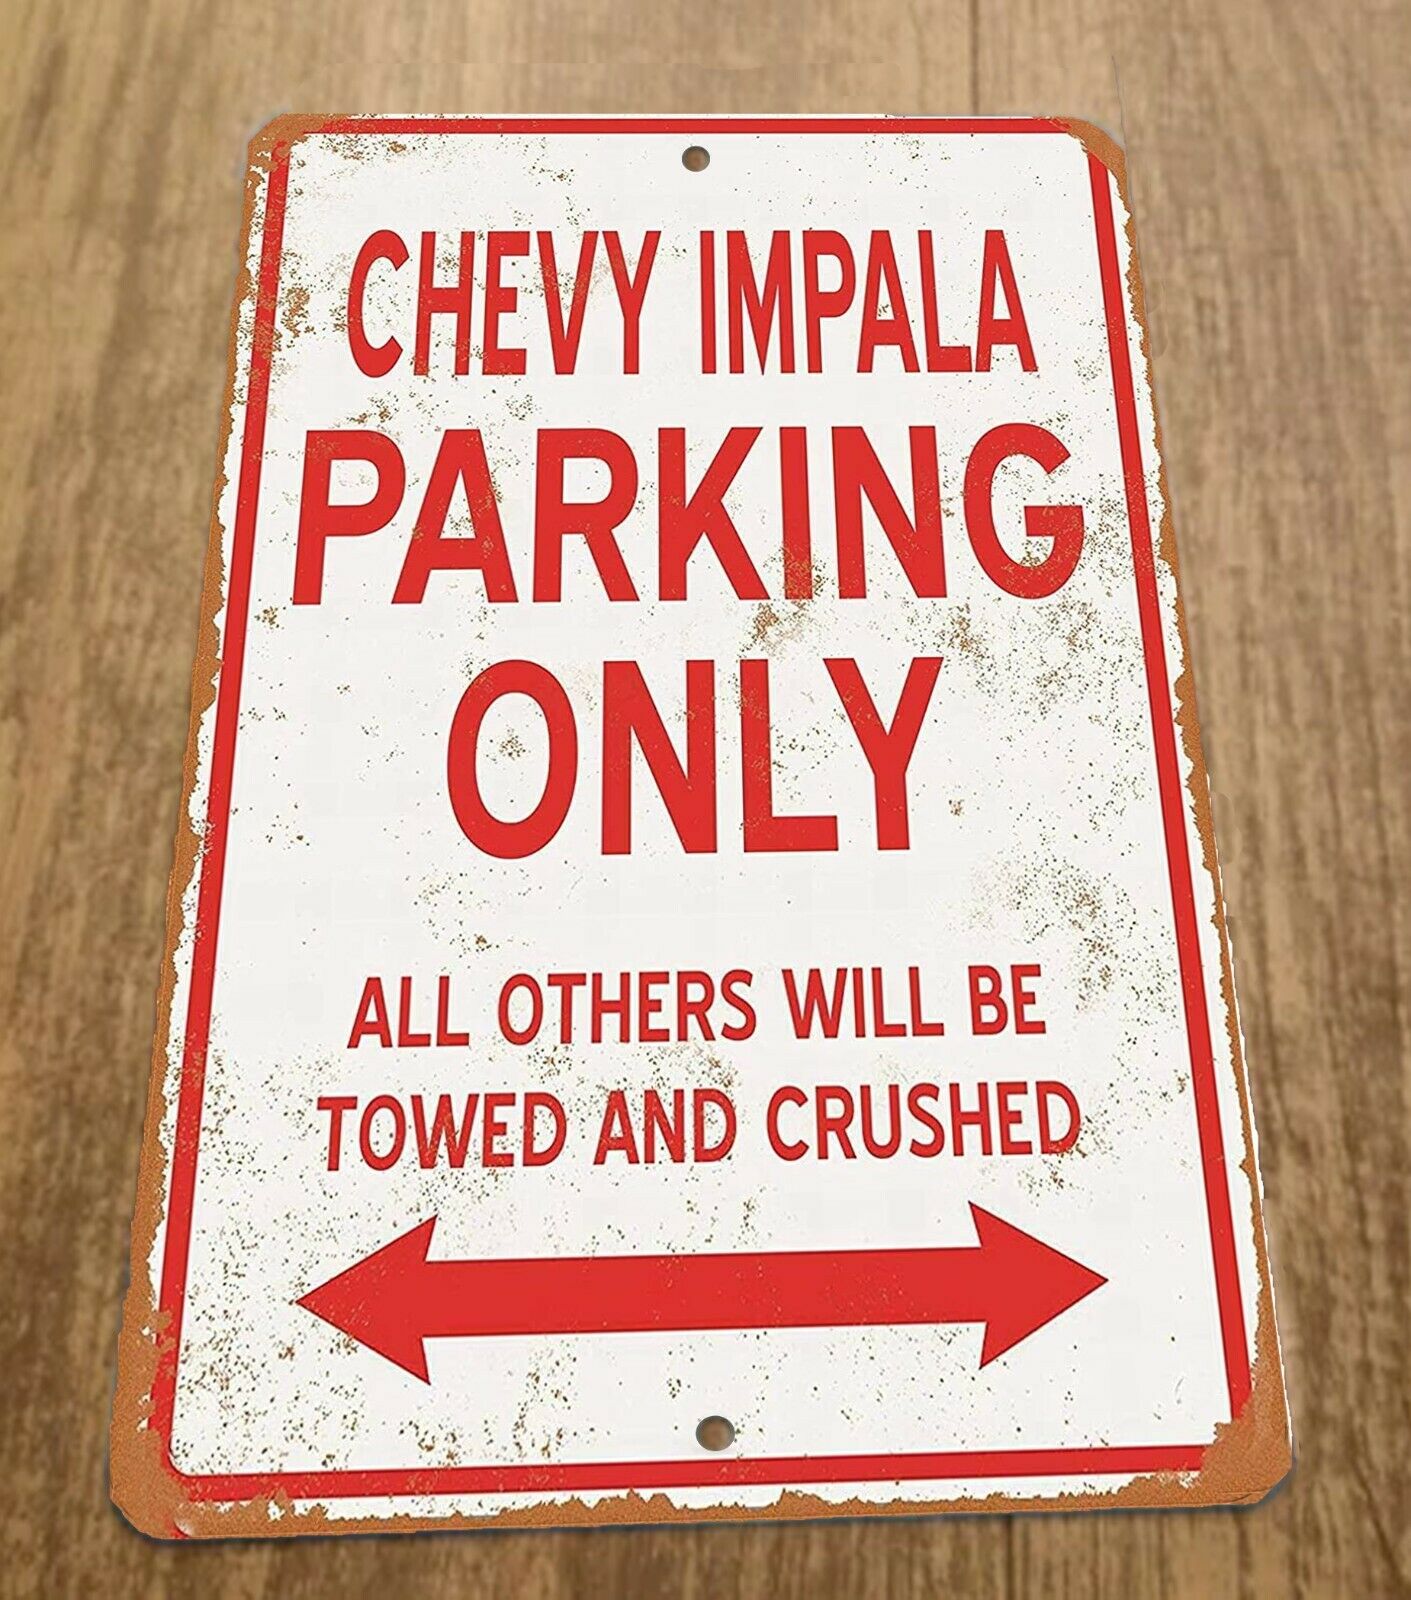 Chevy Impala Parking Only 8x12 Metal Wall Car Sign Garage Poster